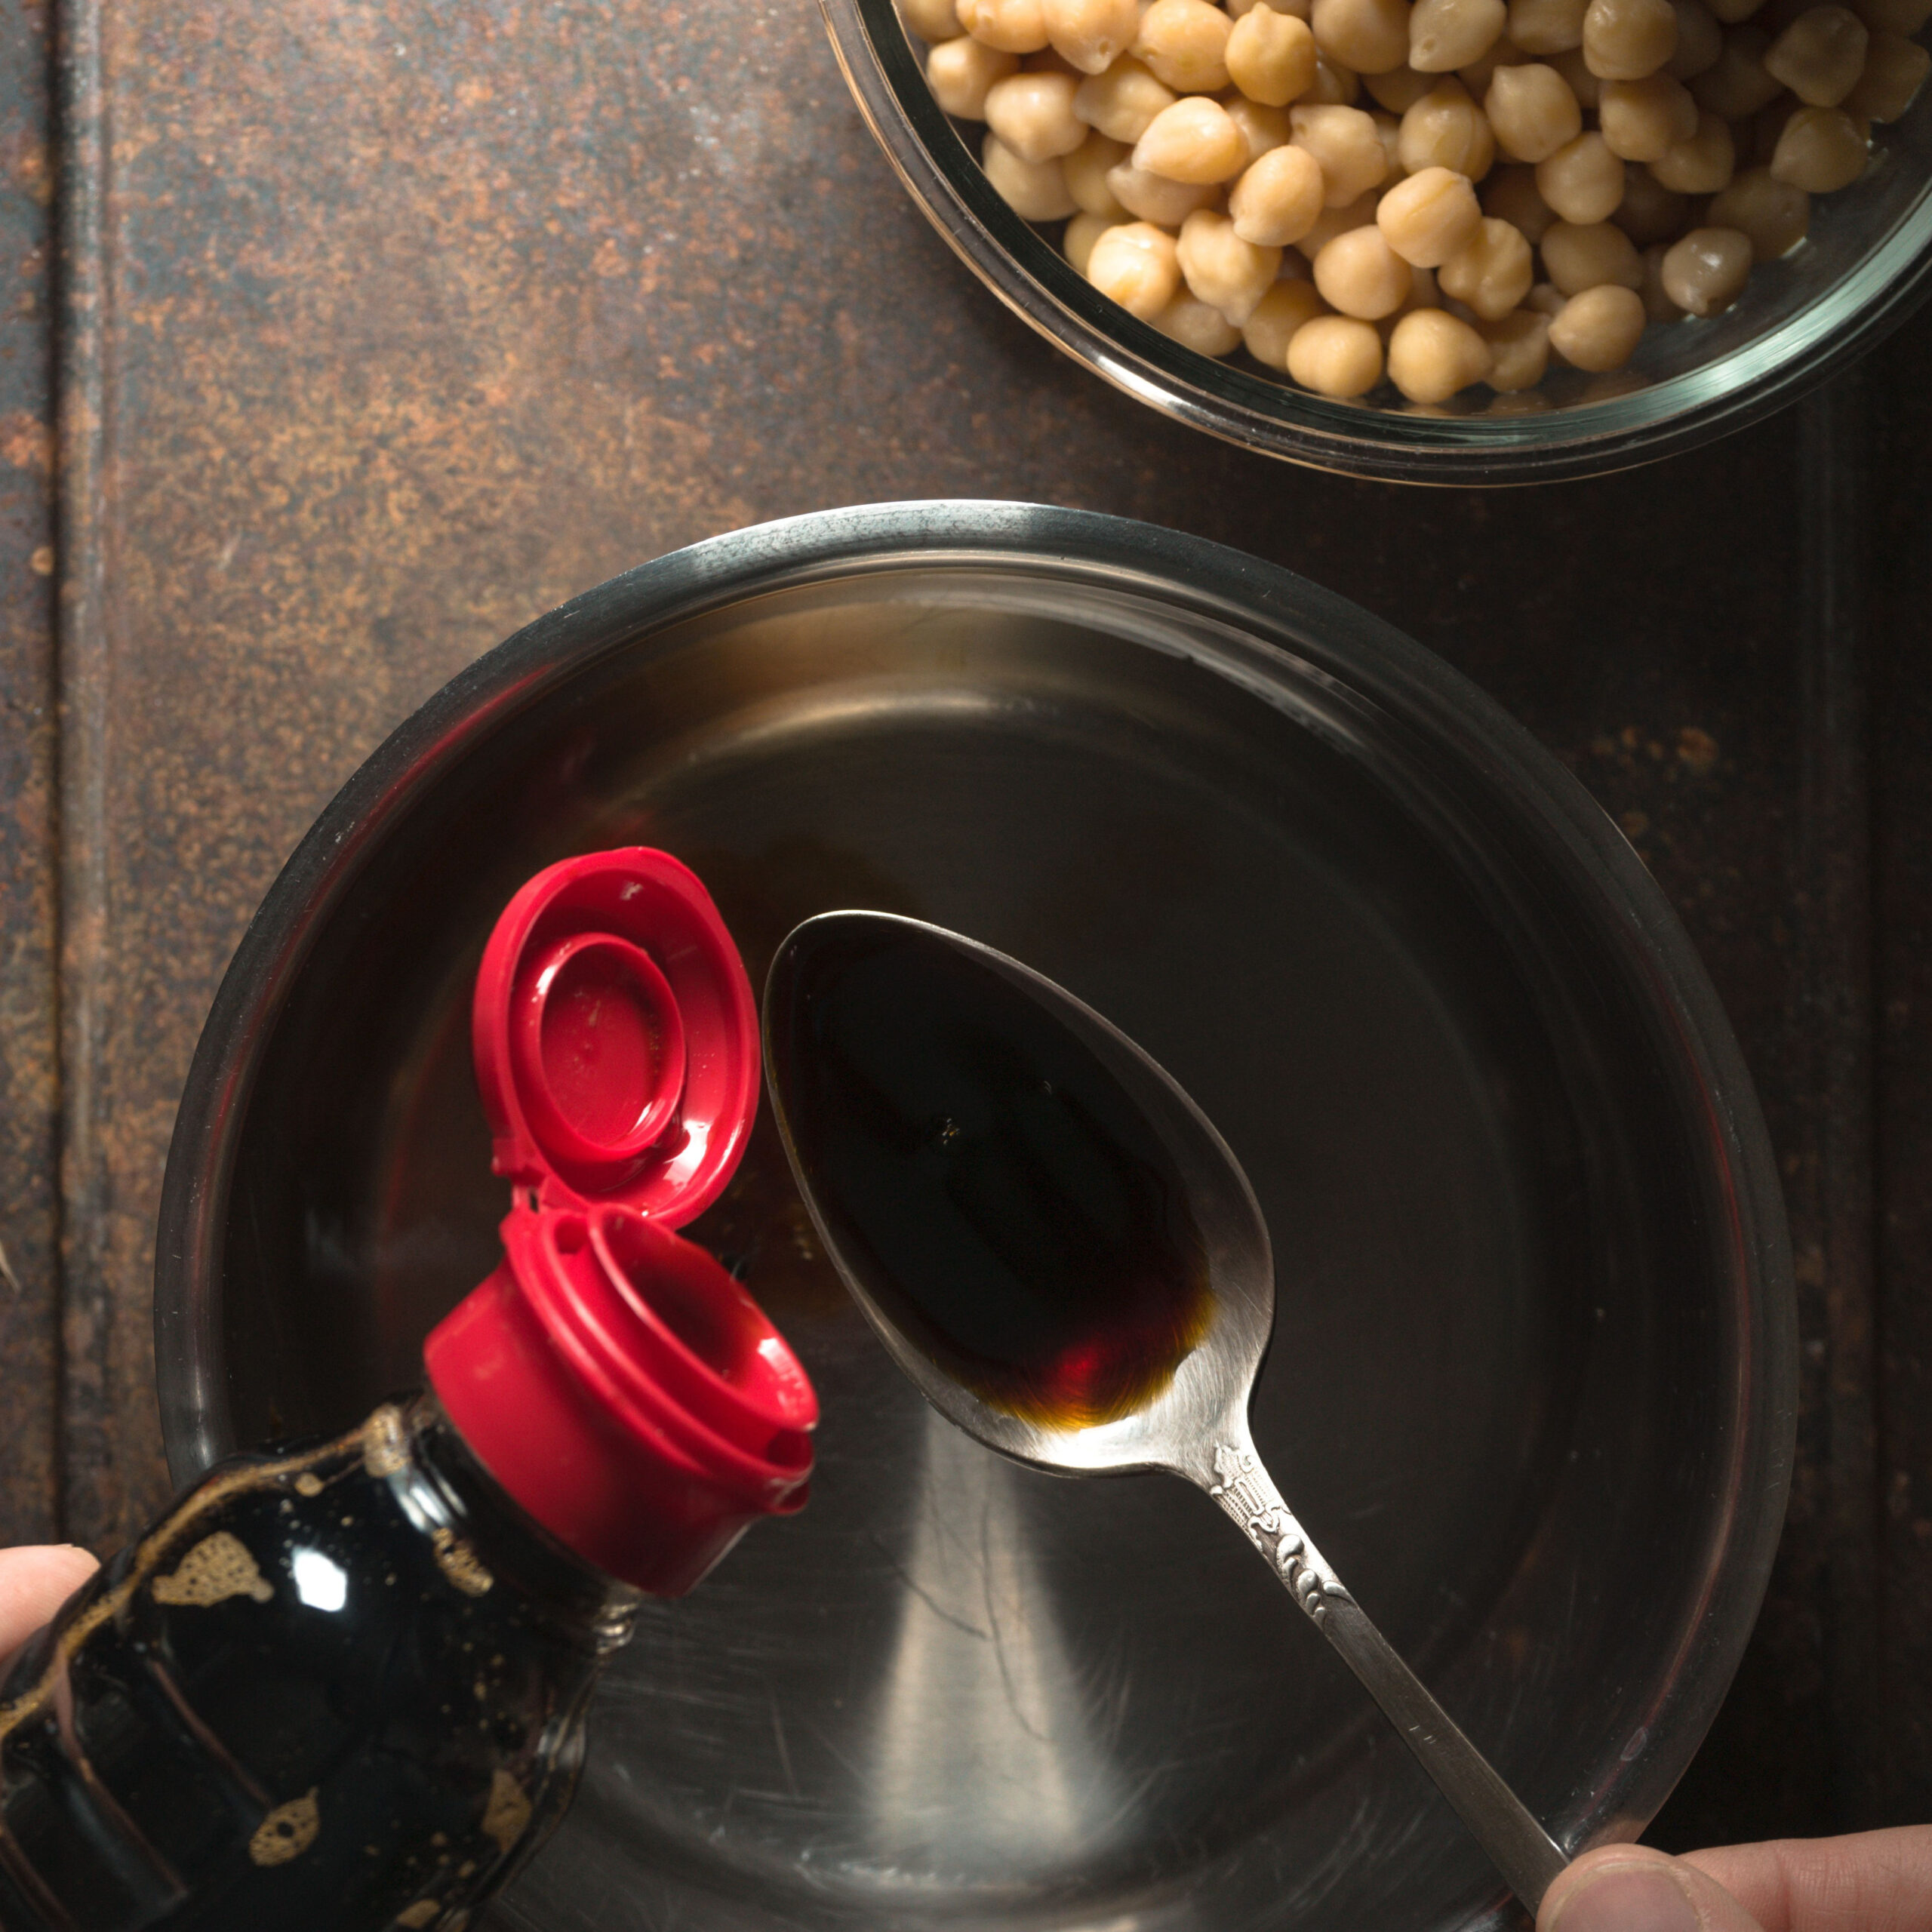 soy sauce being poured into spoon